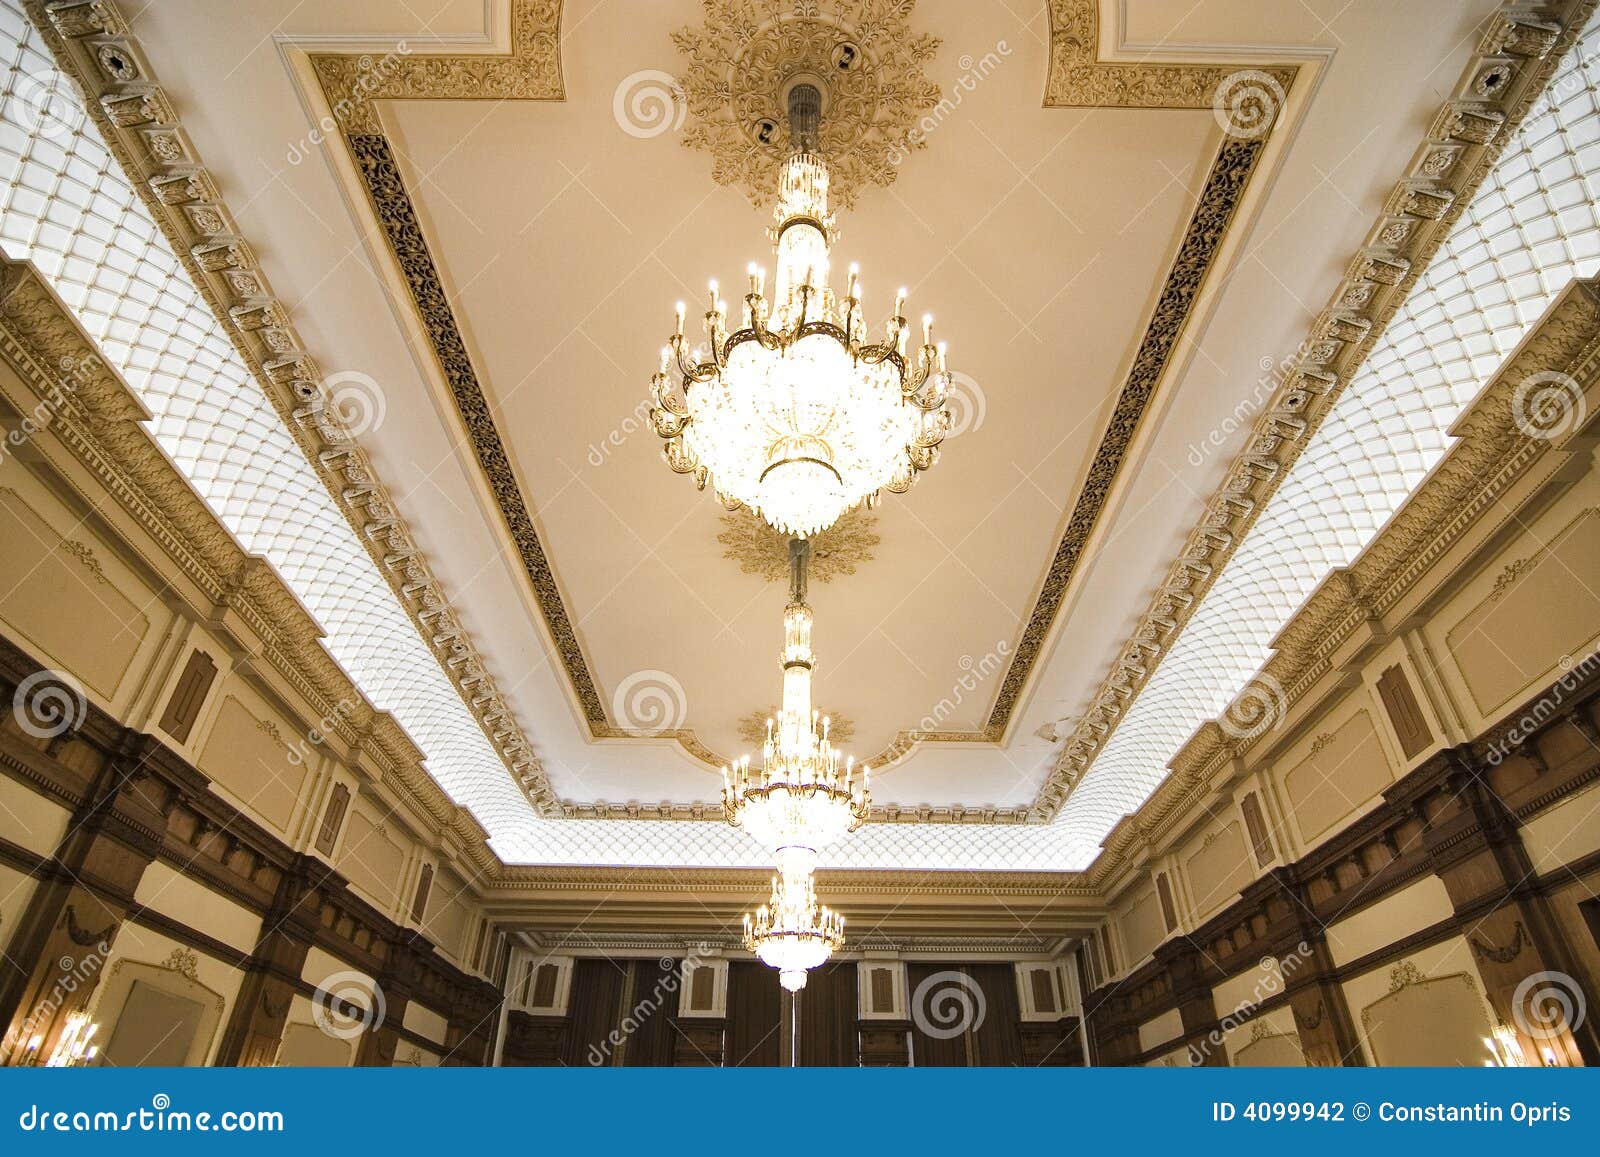 chandeliers on ornate ceiling